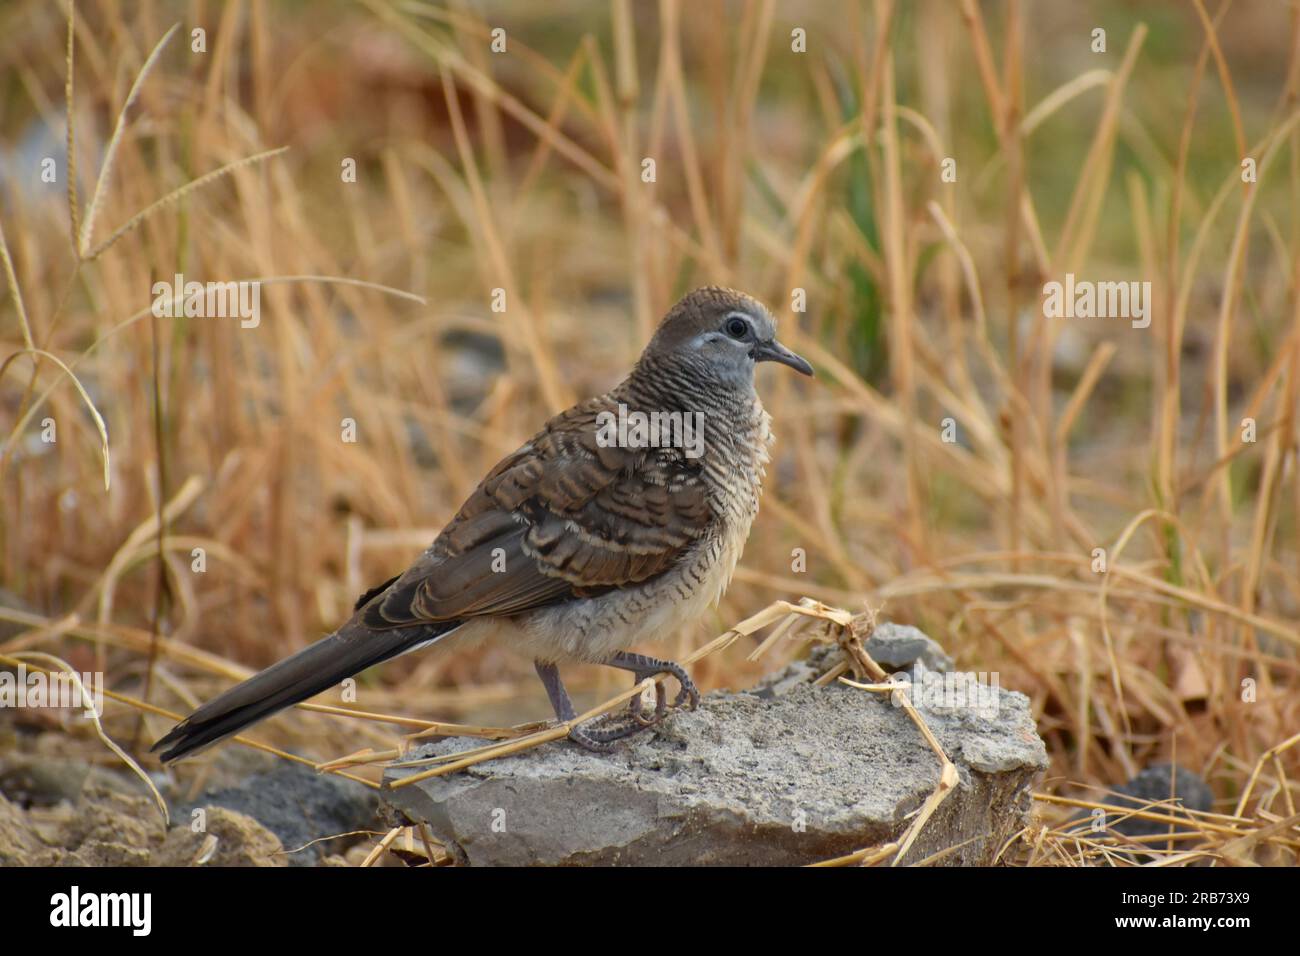 A Zebra dove perched on a small rock on dried grassland. Java, Indonesia. Stock Photo